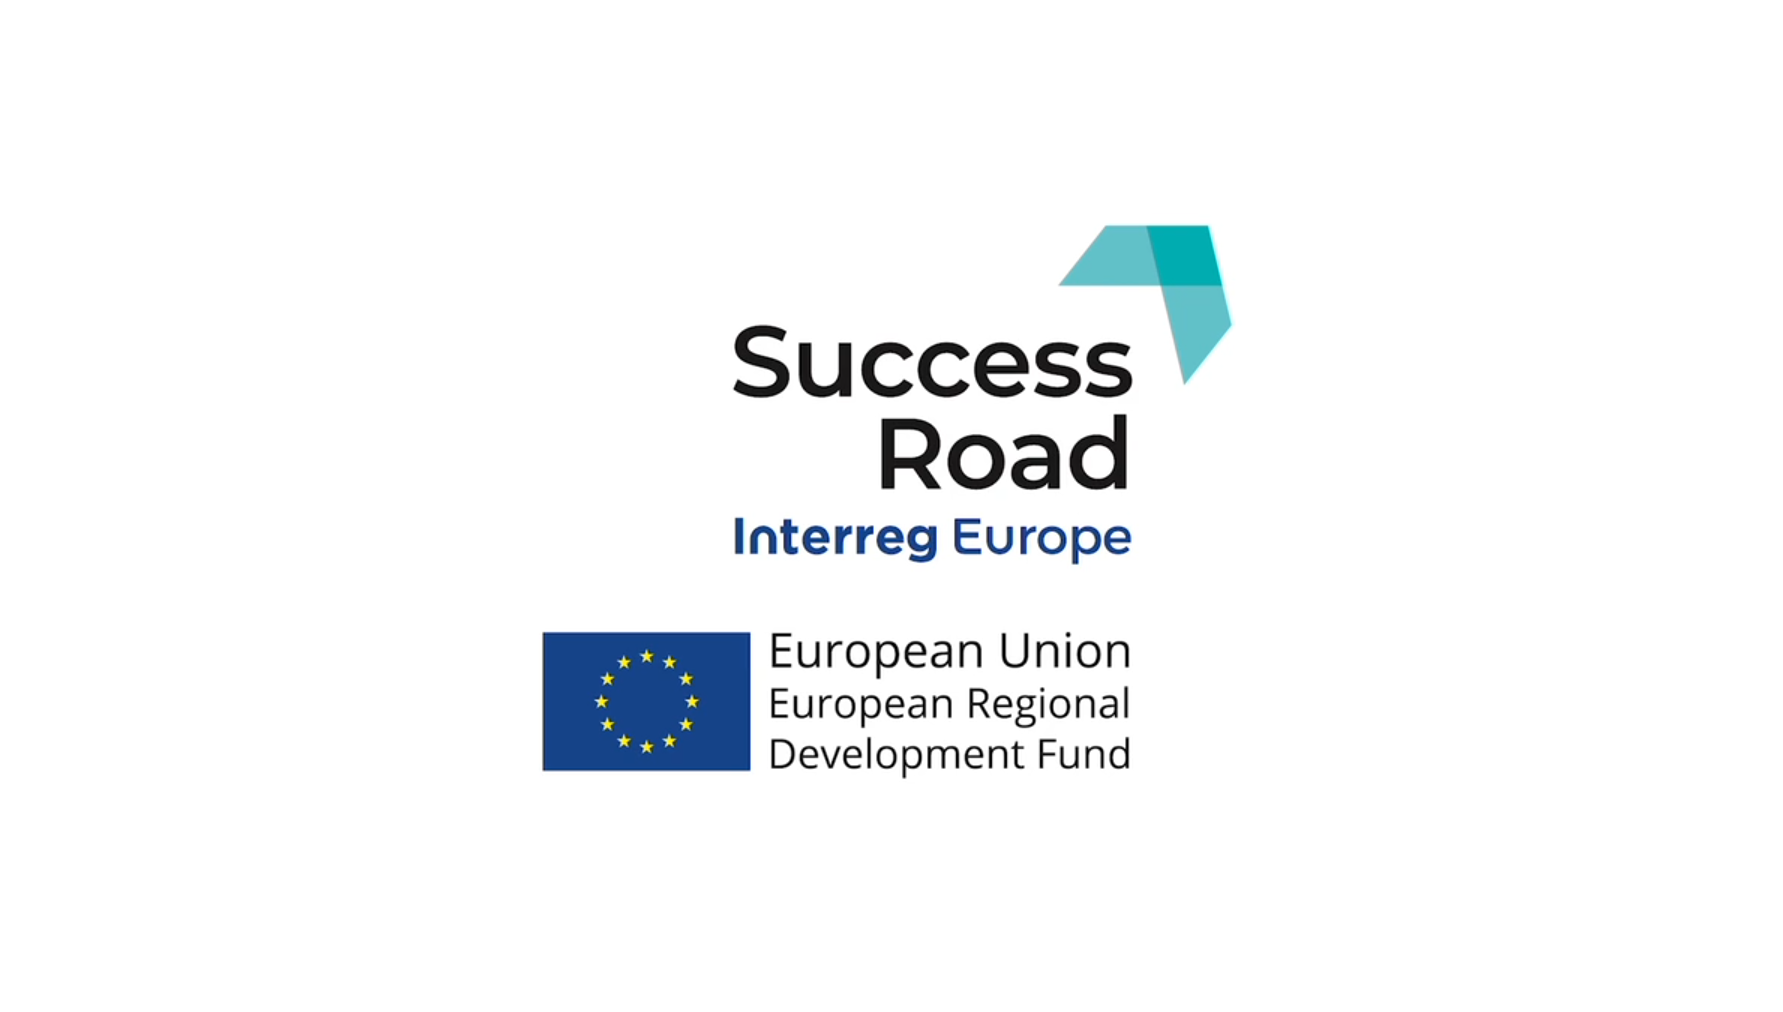 Final Success Road video is out!